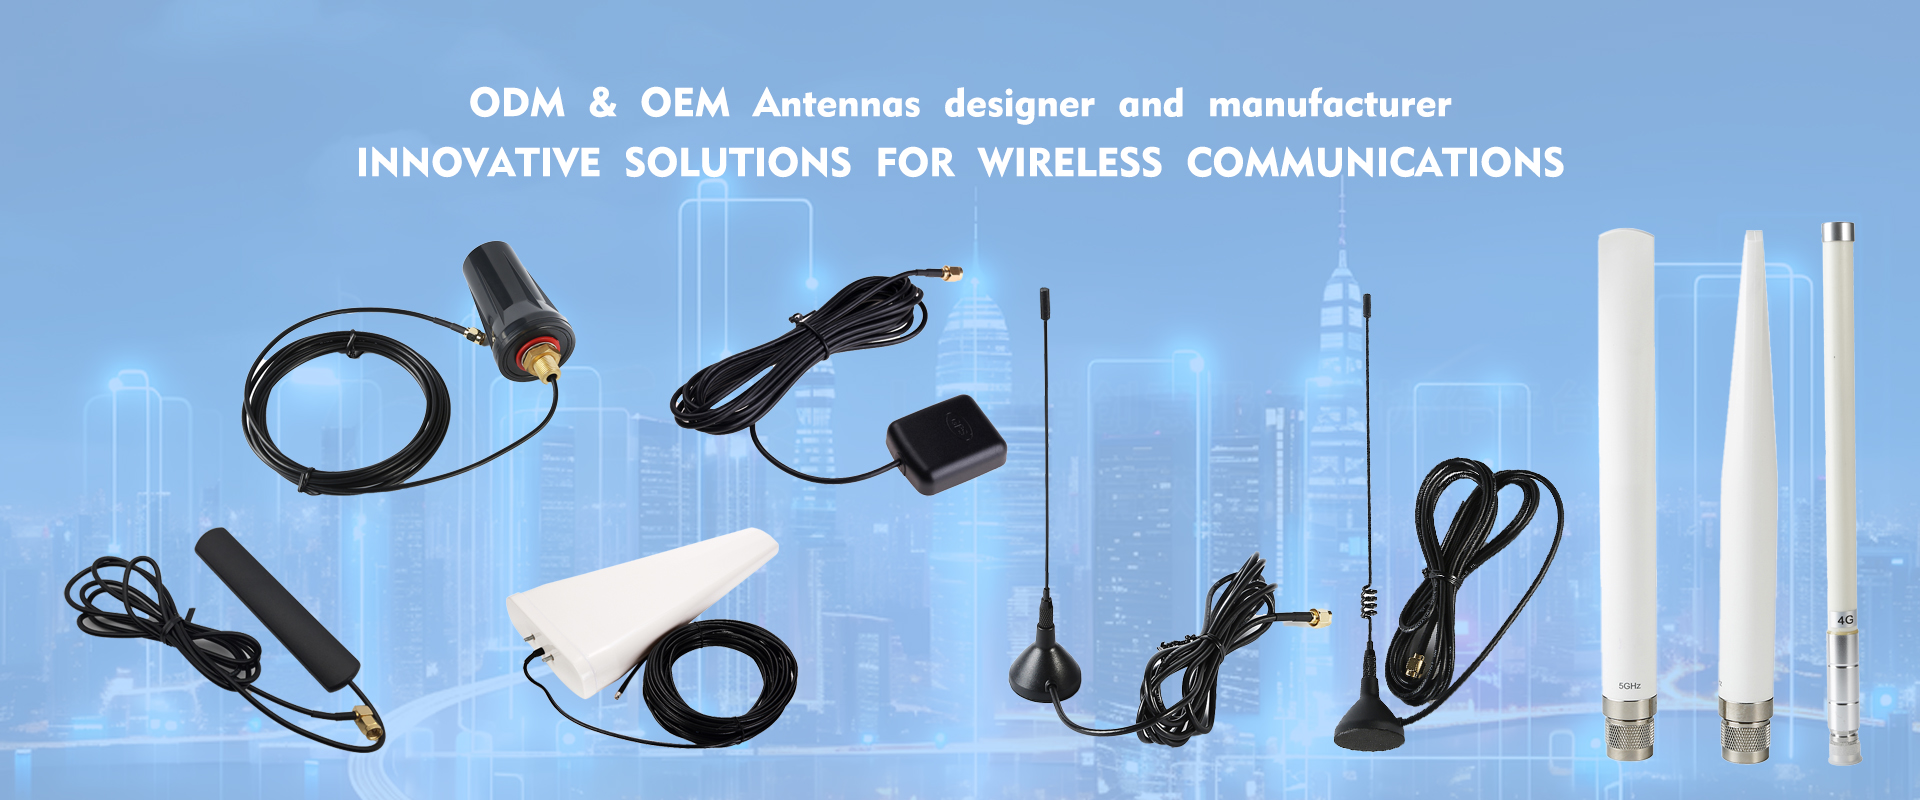 WIFI/GSM/3G/4G/5G/GPS antennas designer and manufacturer
WiFi(2.4&5.8G), LTE/3G/GSM, DVB-T, GPS, NFC, 433MHz, 868MHz, 915MHz Lora, RFID antenna;
I-PEX,SMA,N,MCX,MMCX,F,TNC RF Cable Assembly;
RF connector Series: SMA,SMB,F,PAL,N,MMCX,MCX connector